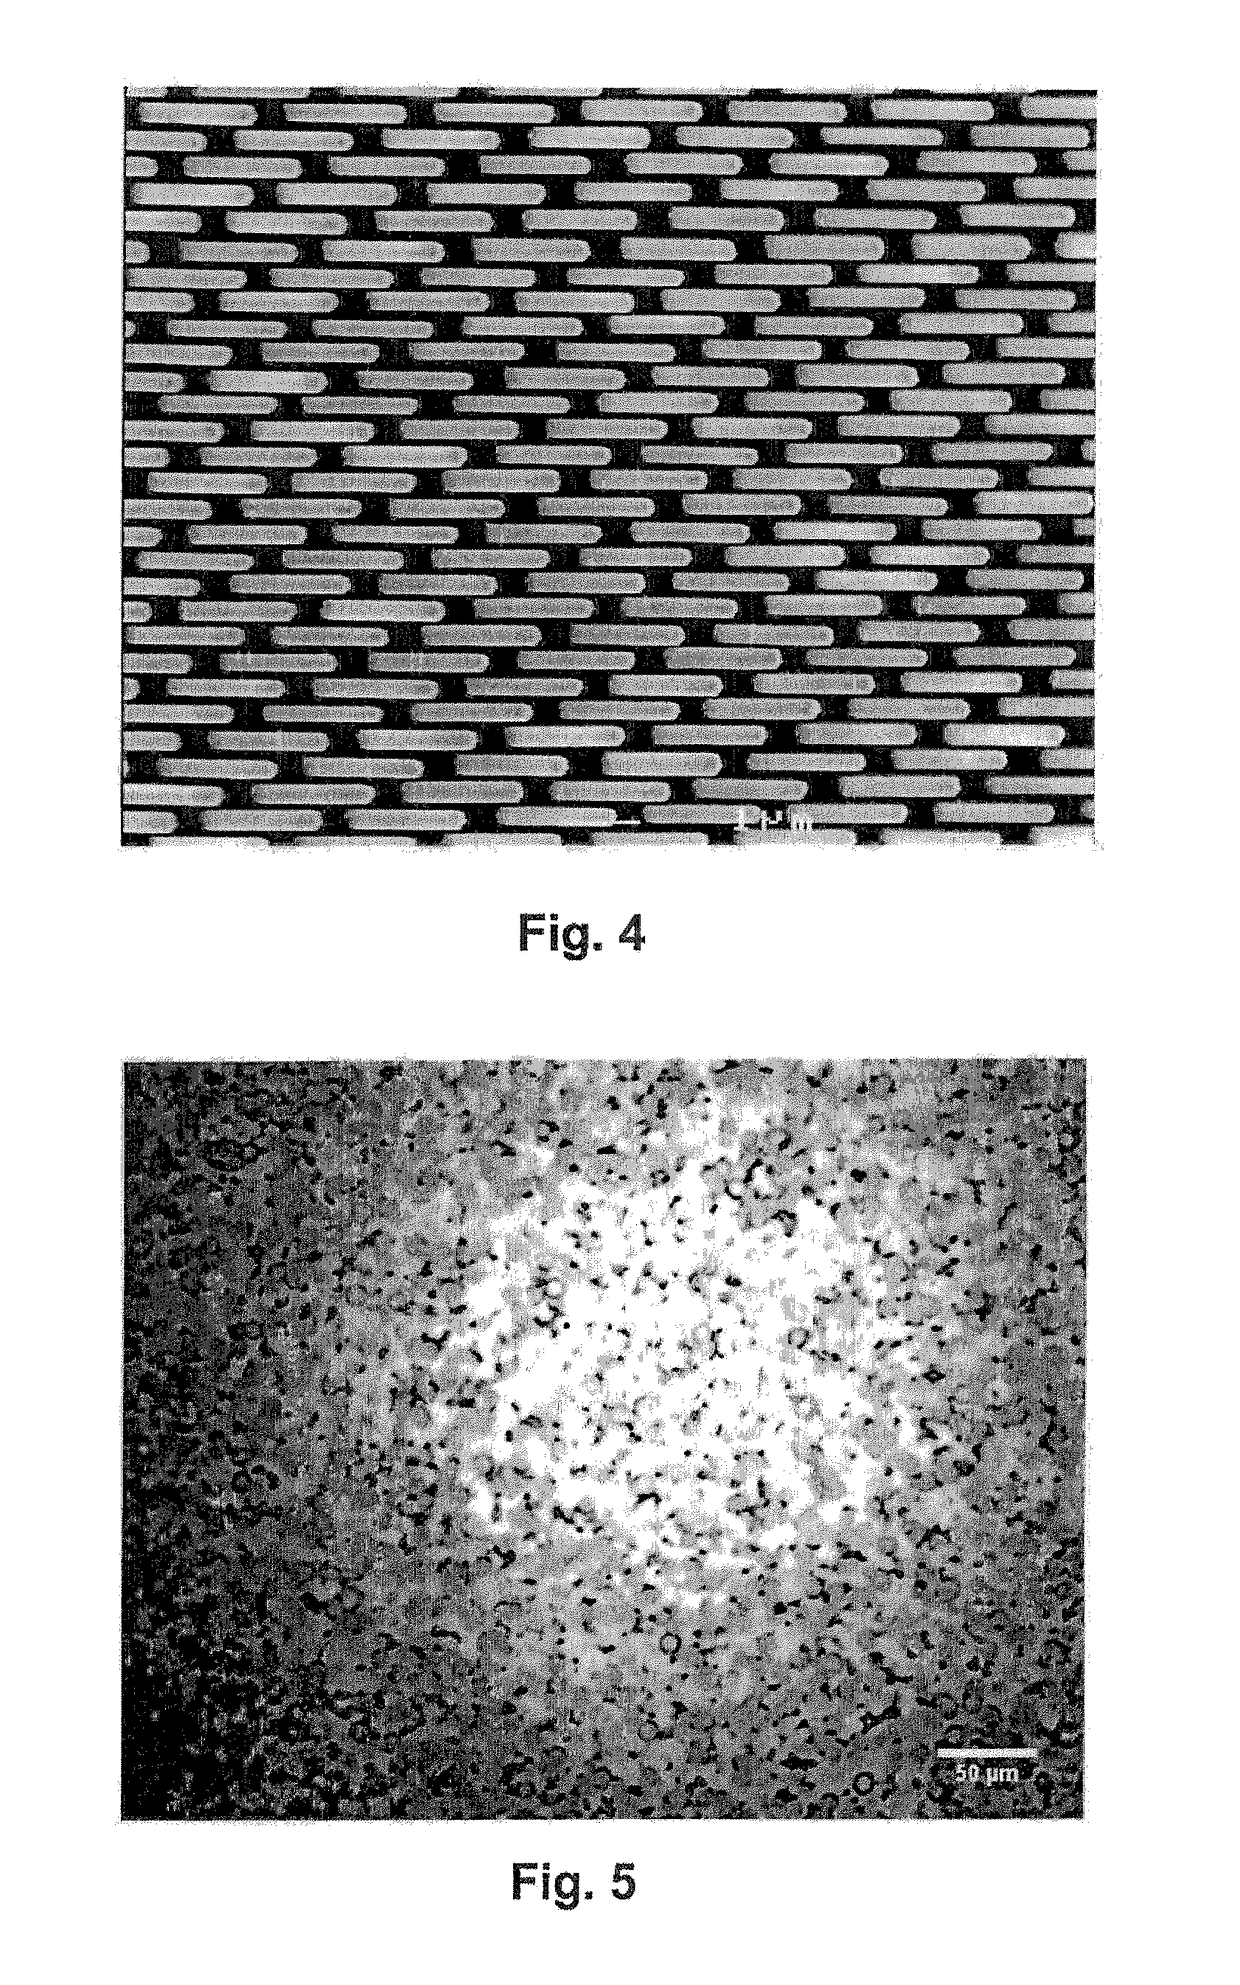 Substrate with buffer layer for oriented nanowire growth